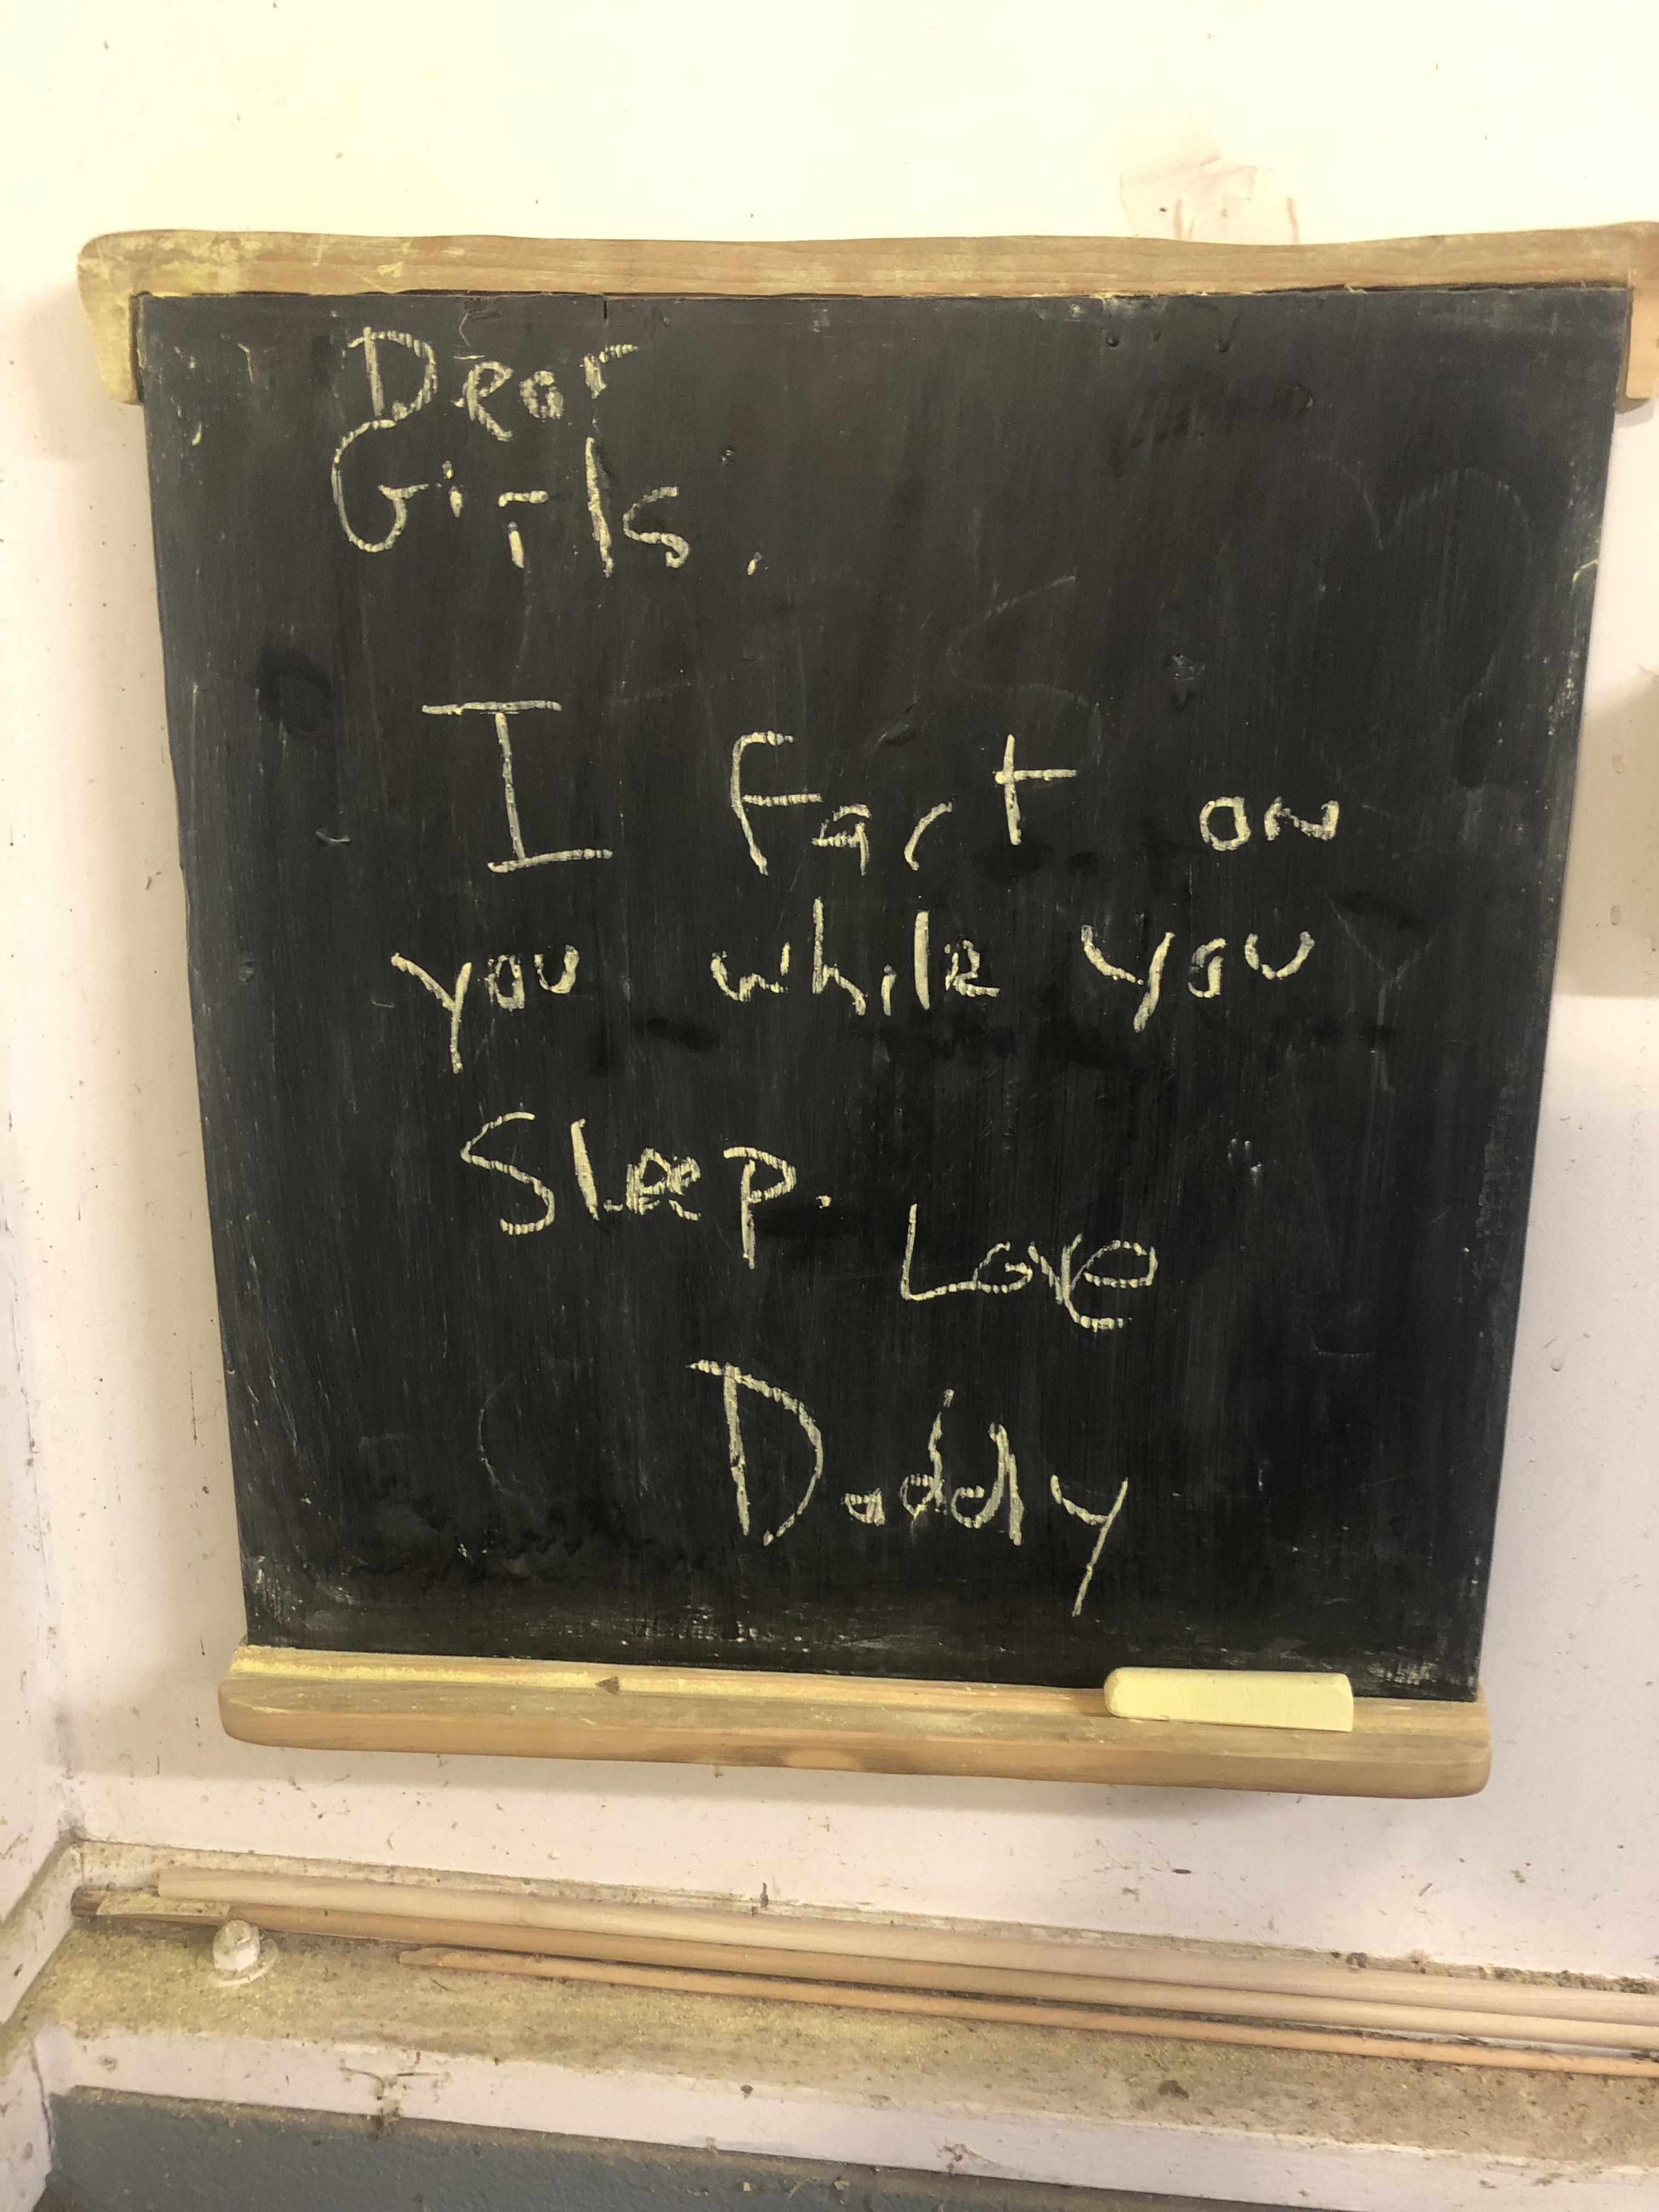 I built a chalkboard for my girls to write me notes. My neighbor came over to borrow something yesterday and I just read it now